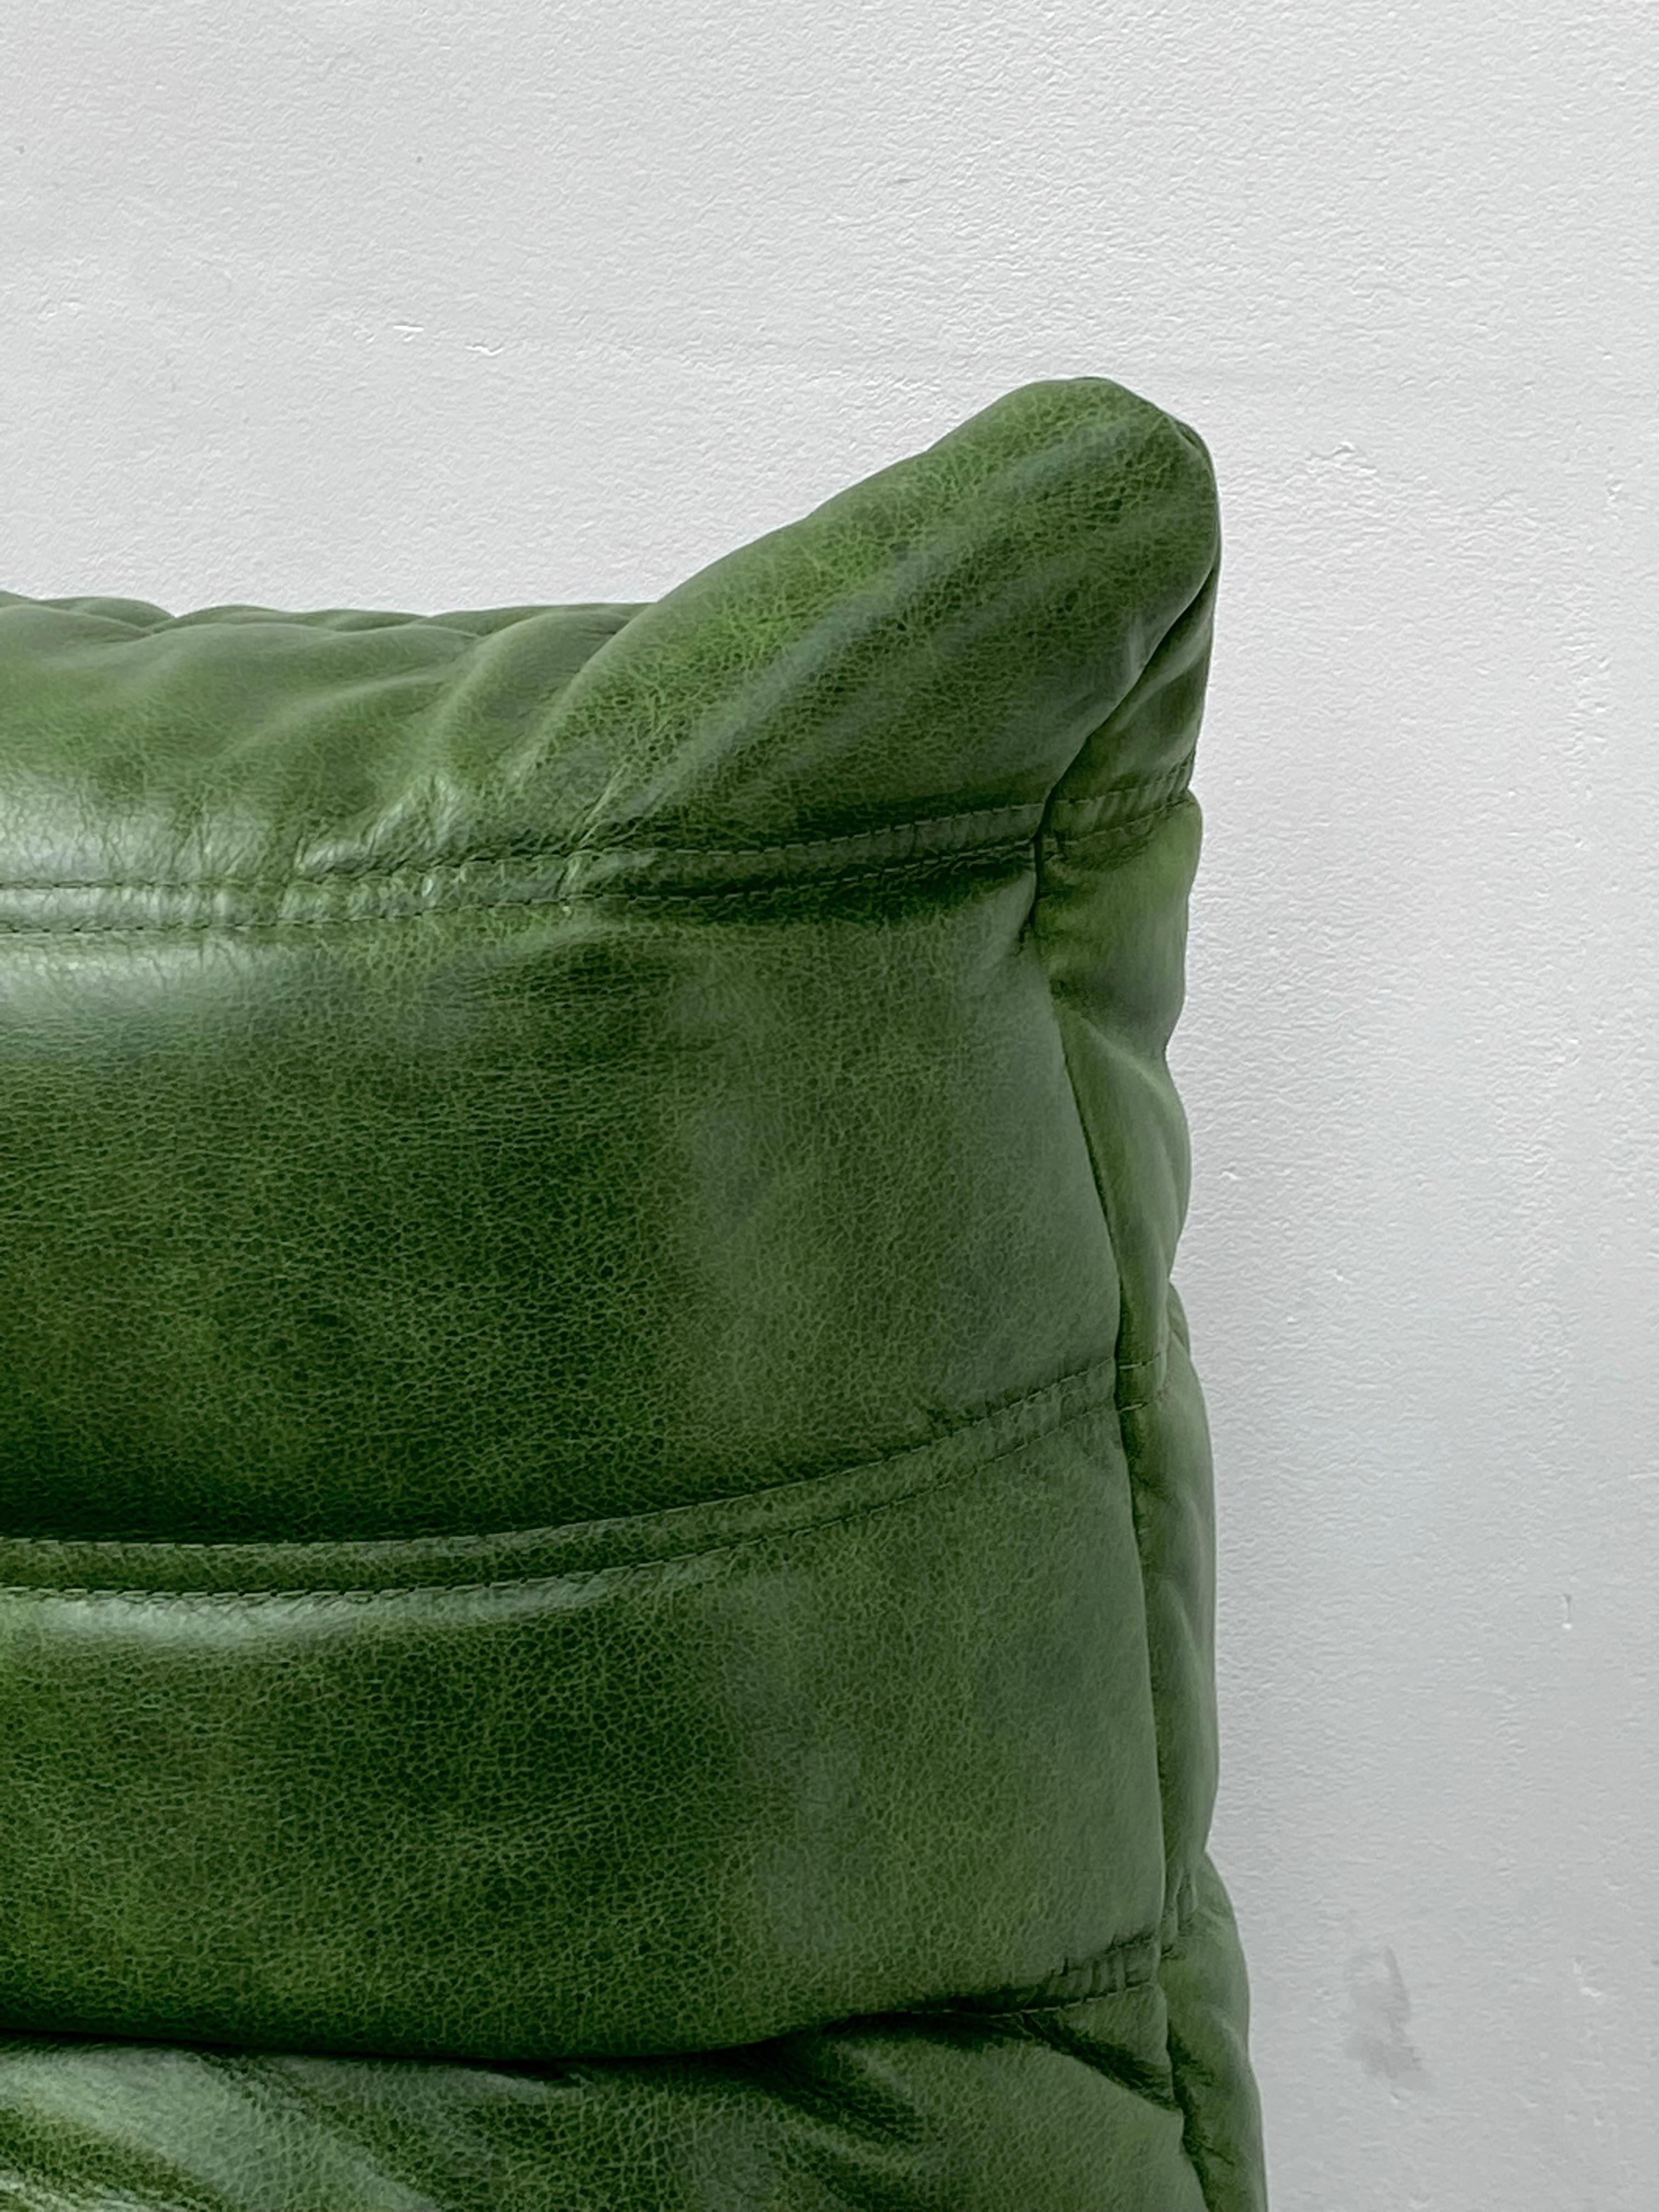 Mid-Century Modern French Togo Chair in Green Leather by Michel Ducaroy for Ligne Roset, 1974. For Sale